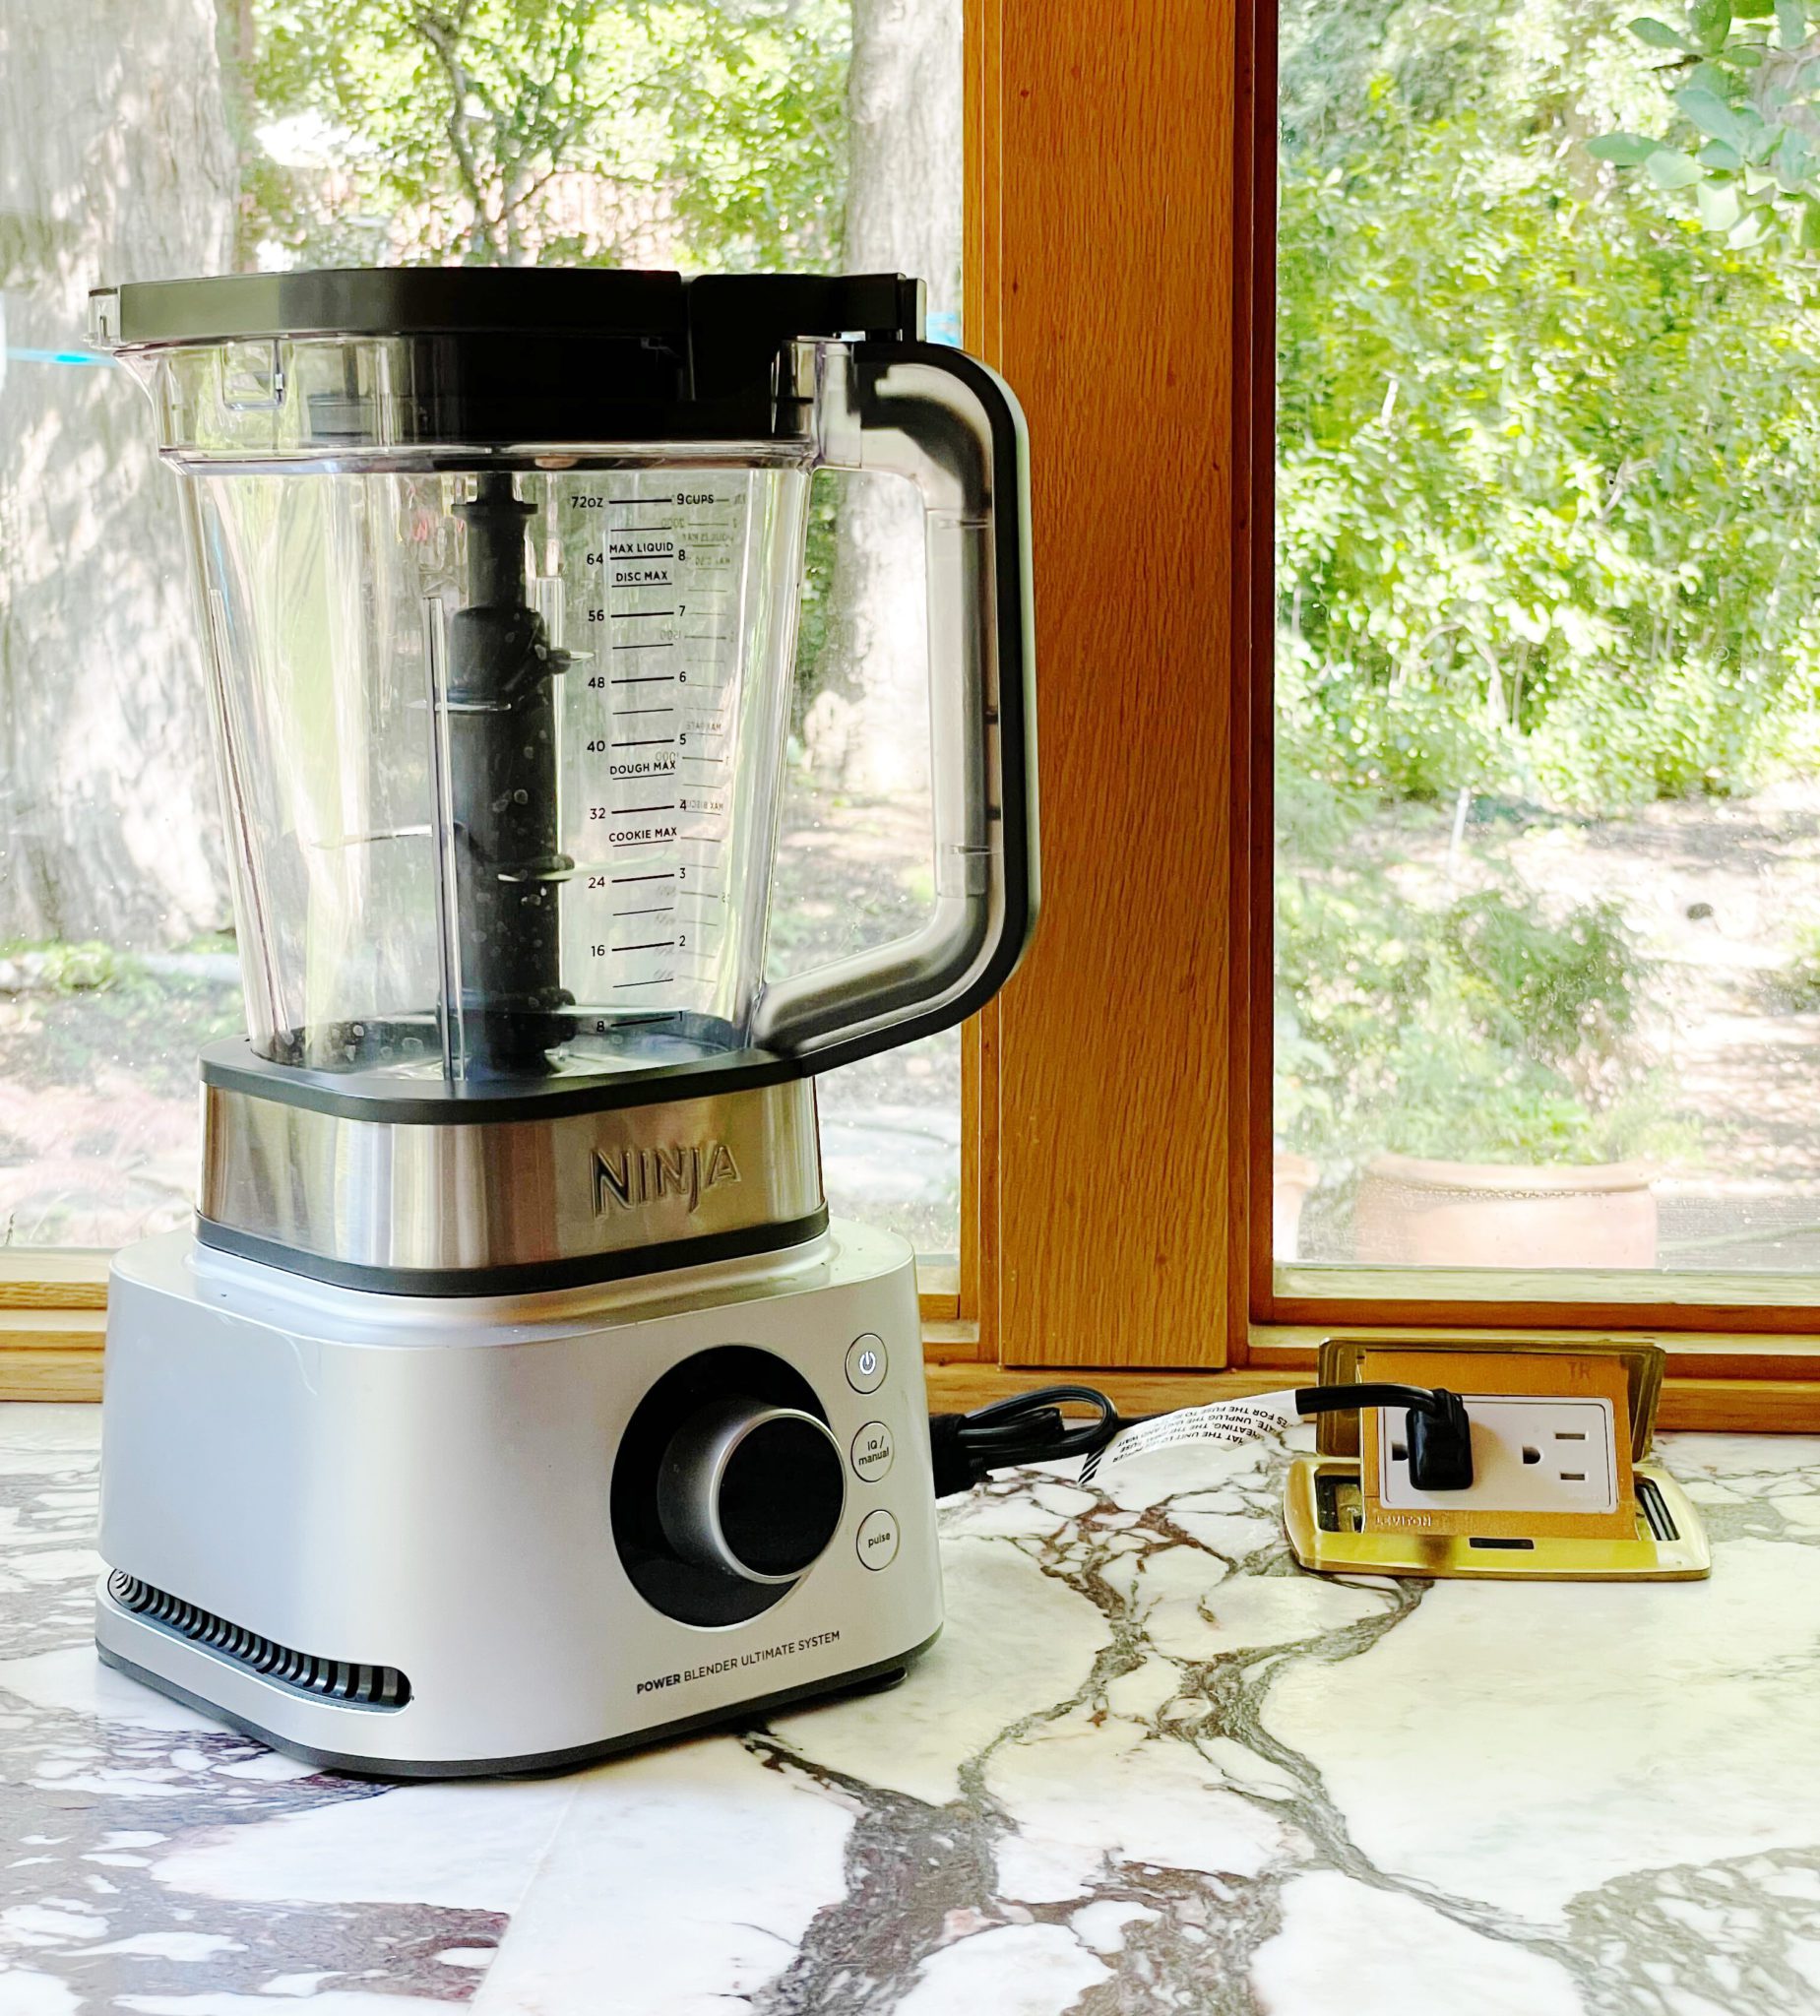 Product Review: The 2-in-1 Blender and Processor That Improved My Cooking | Wit & Delight | Designing a Life Well-Lived